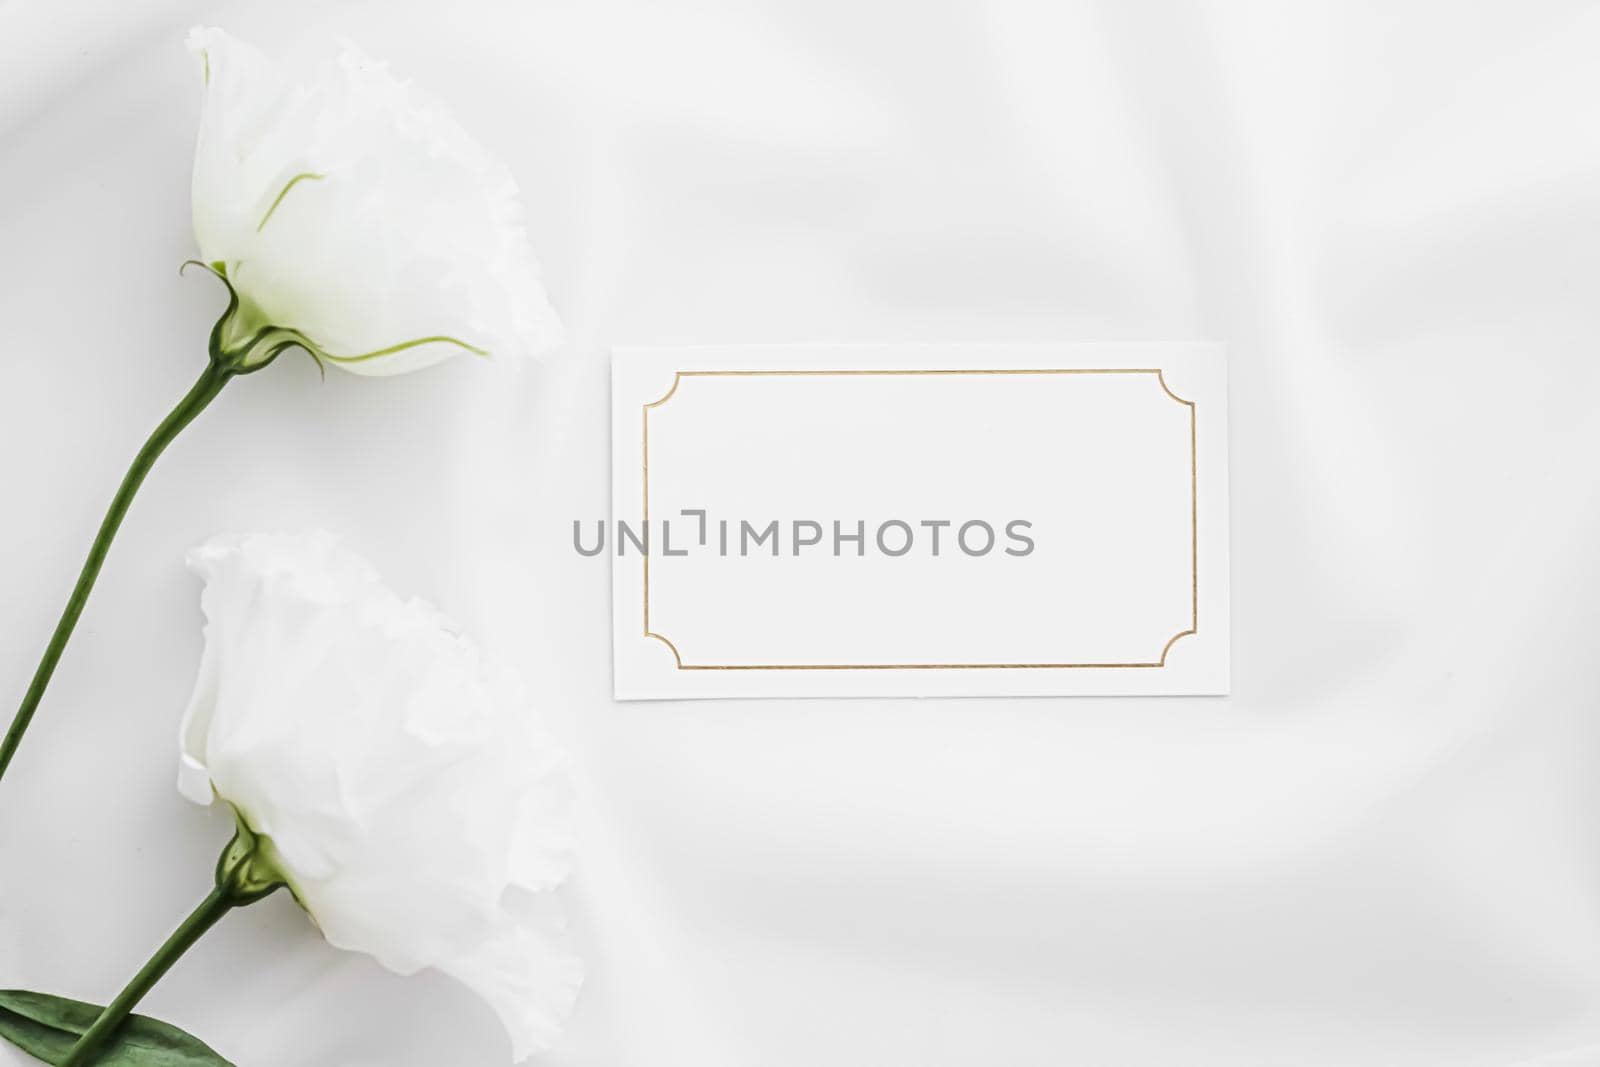 Wedding invitation or gift card and white rose flowers on silk fabric as bridal flatlay background, blank paper and holiday branding, flat lay design by Anneleven